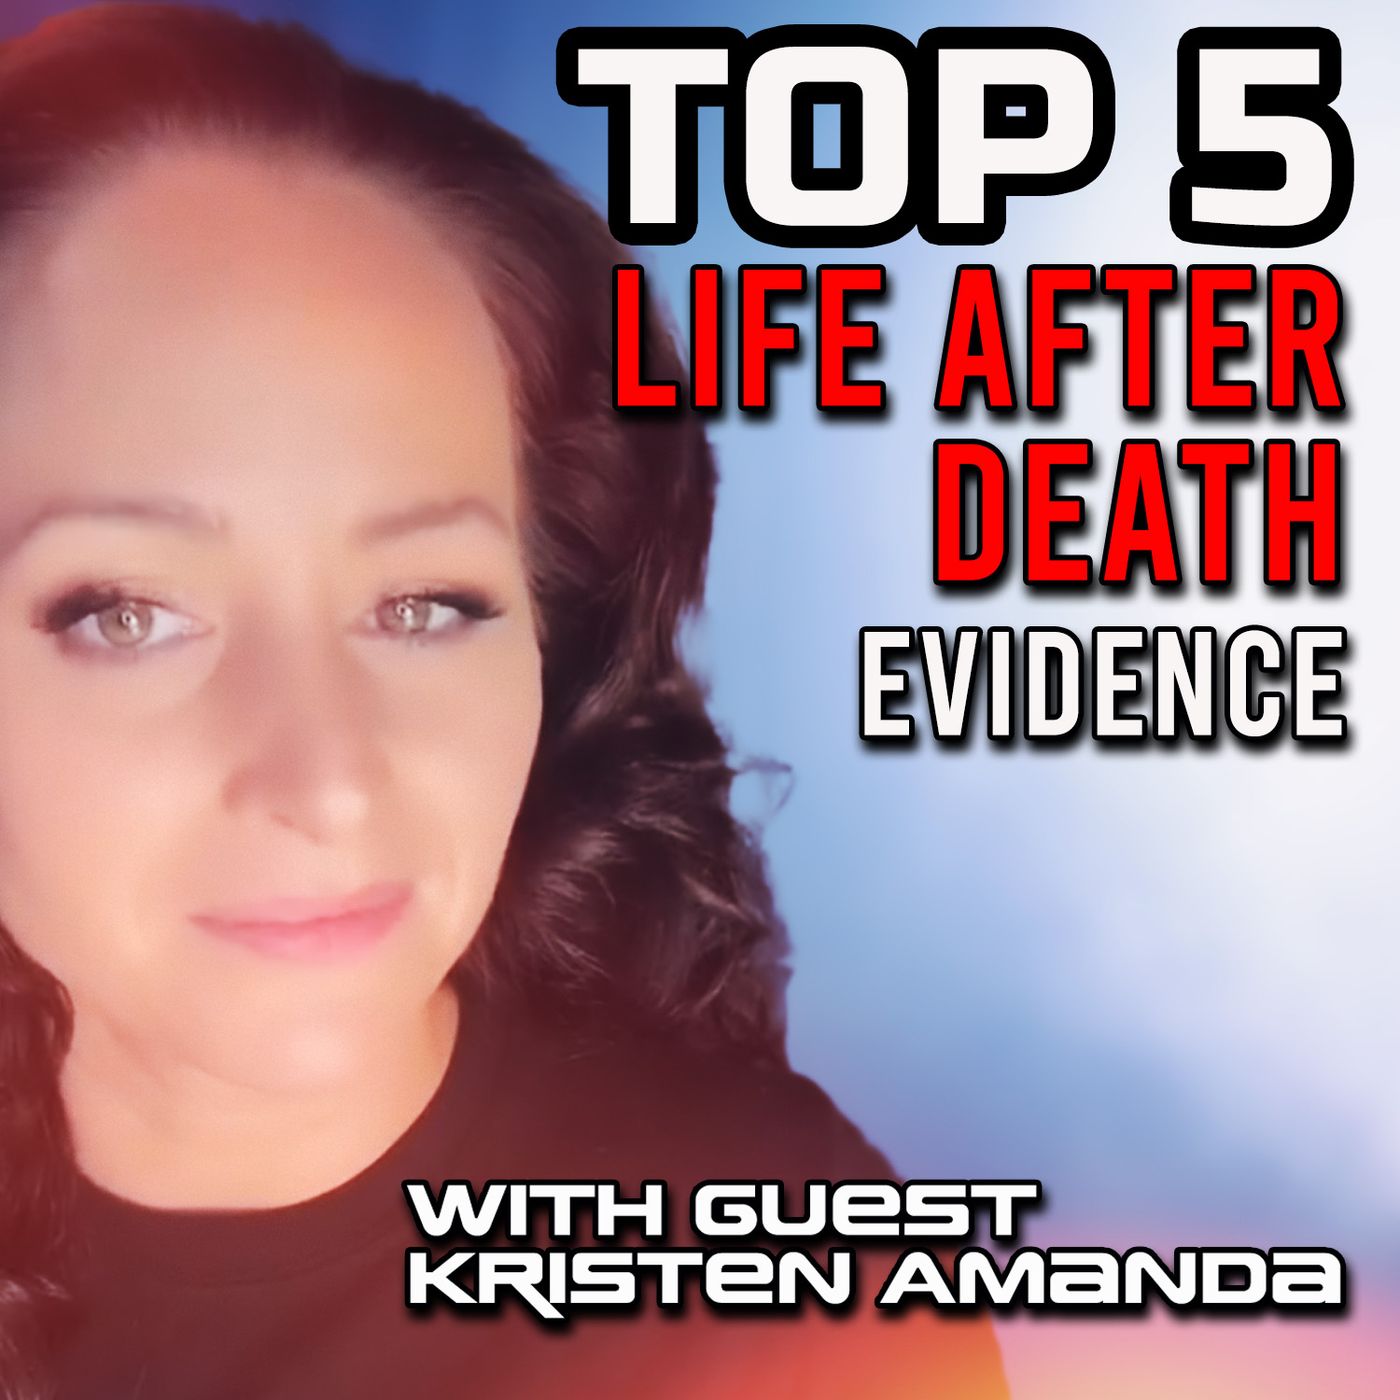 TOP 5 Evidence for Life After Death